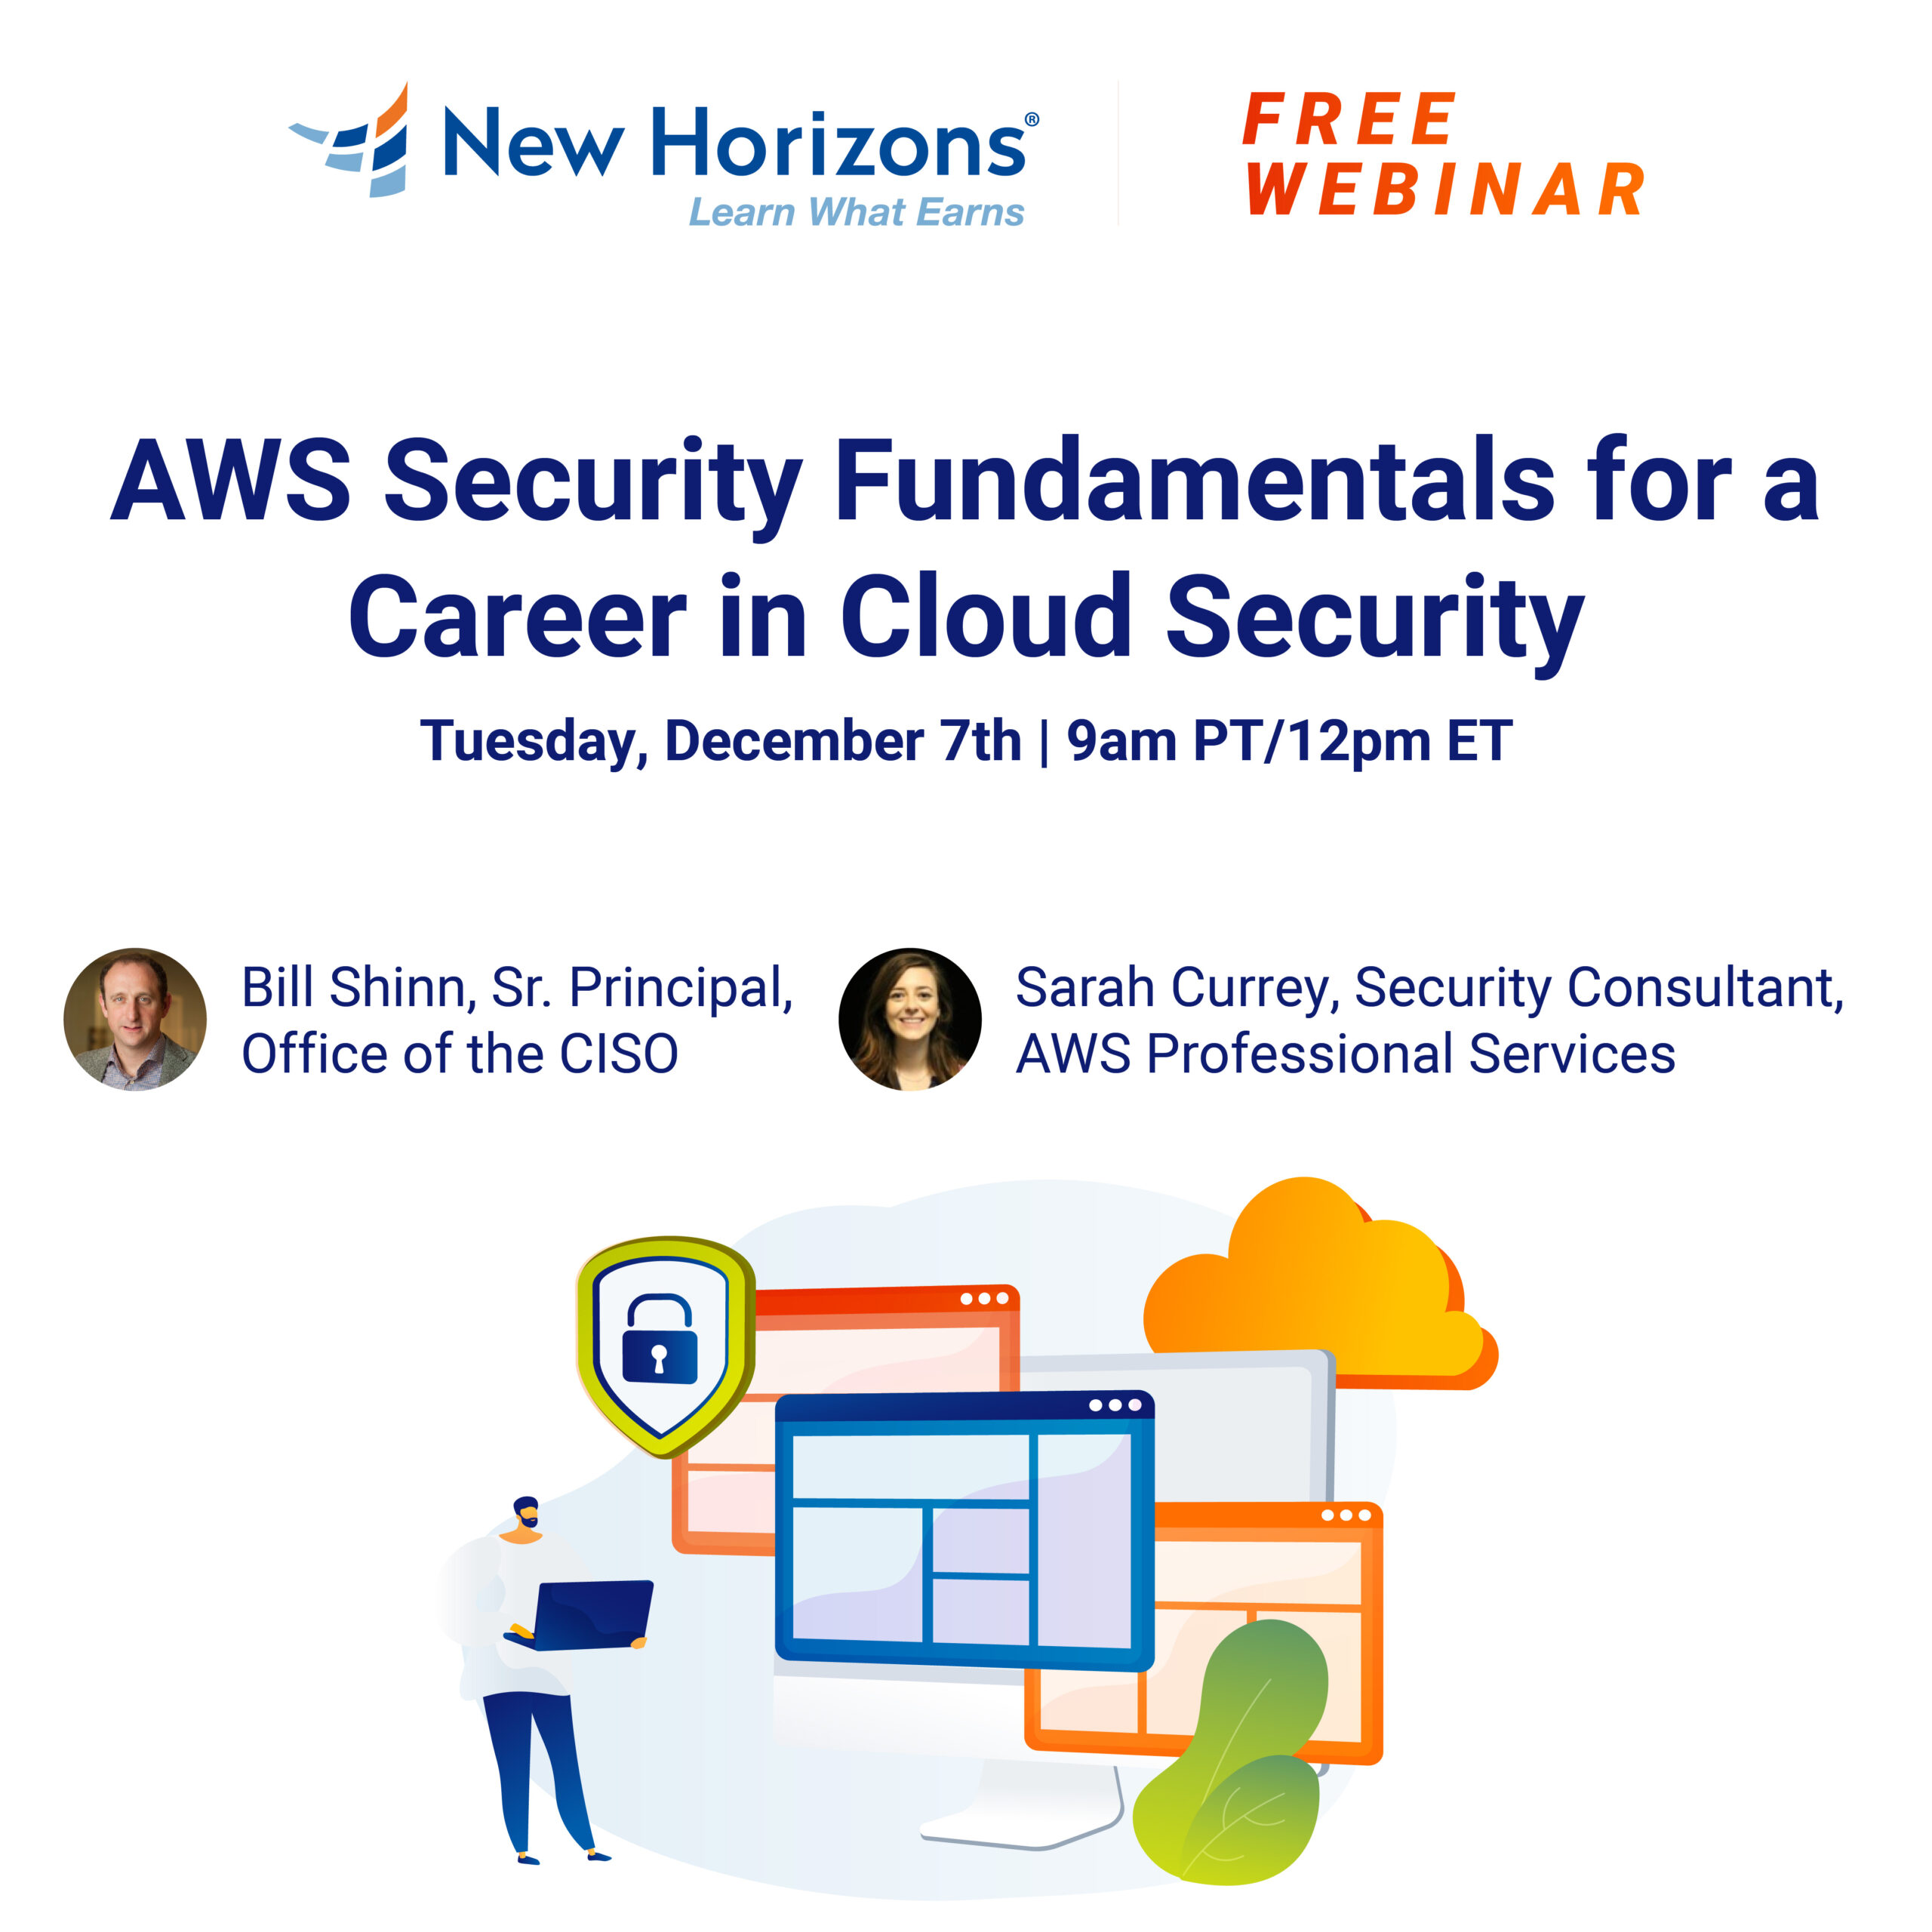 AWS Security Fundamentals & Preparing for a Career in Cloud Security